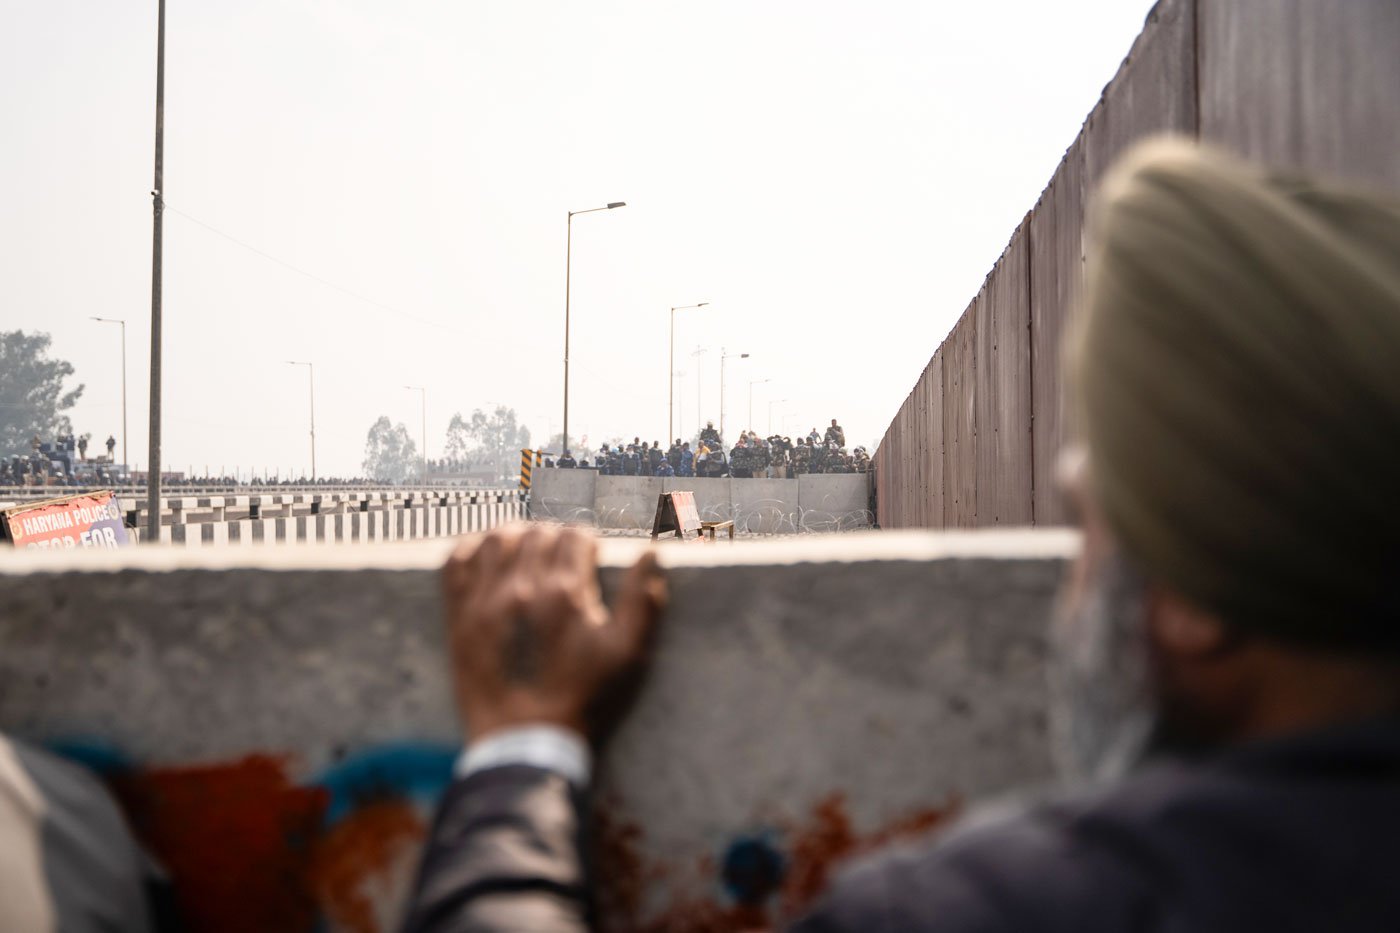 At the Shambhu border, they were met with paramilitary, RAF, and police officers. Concrete walls had been set up along with nails laid on the road